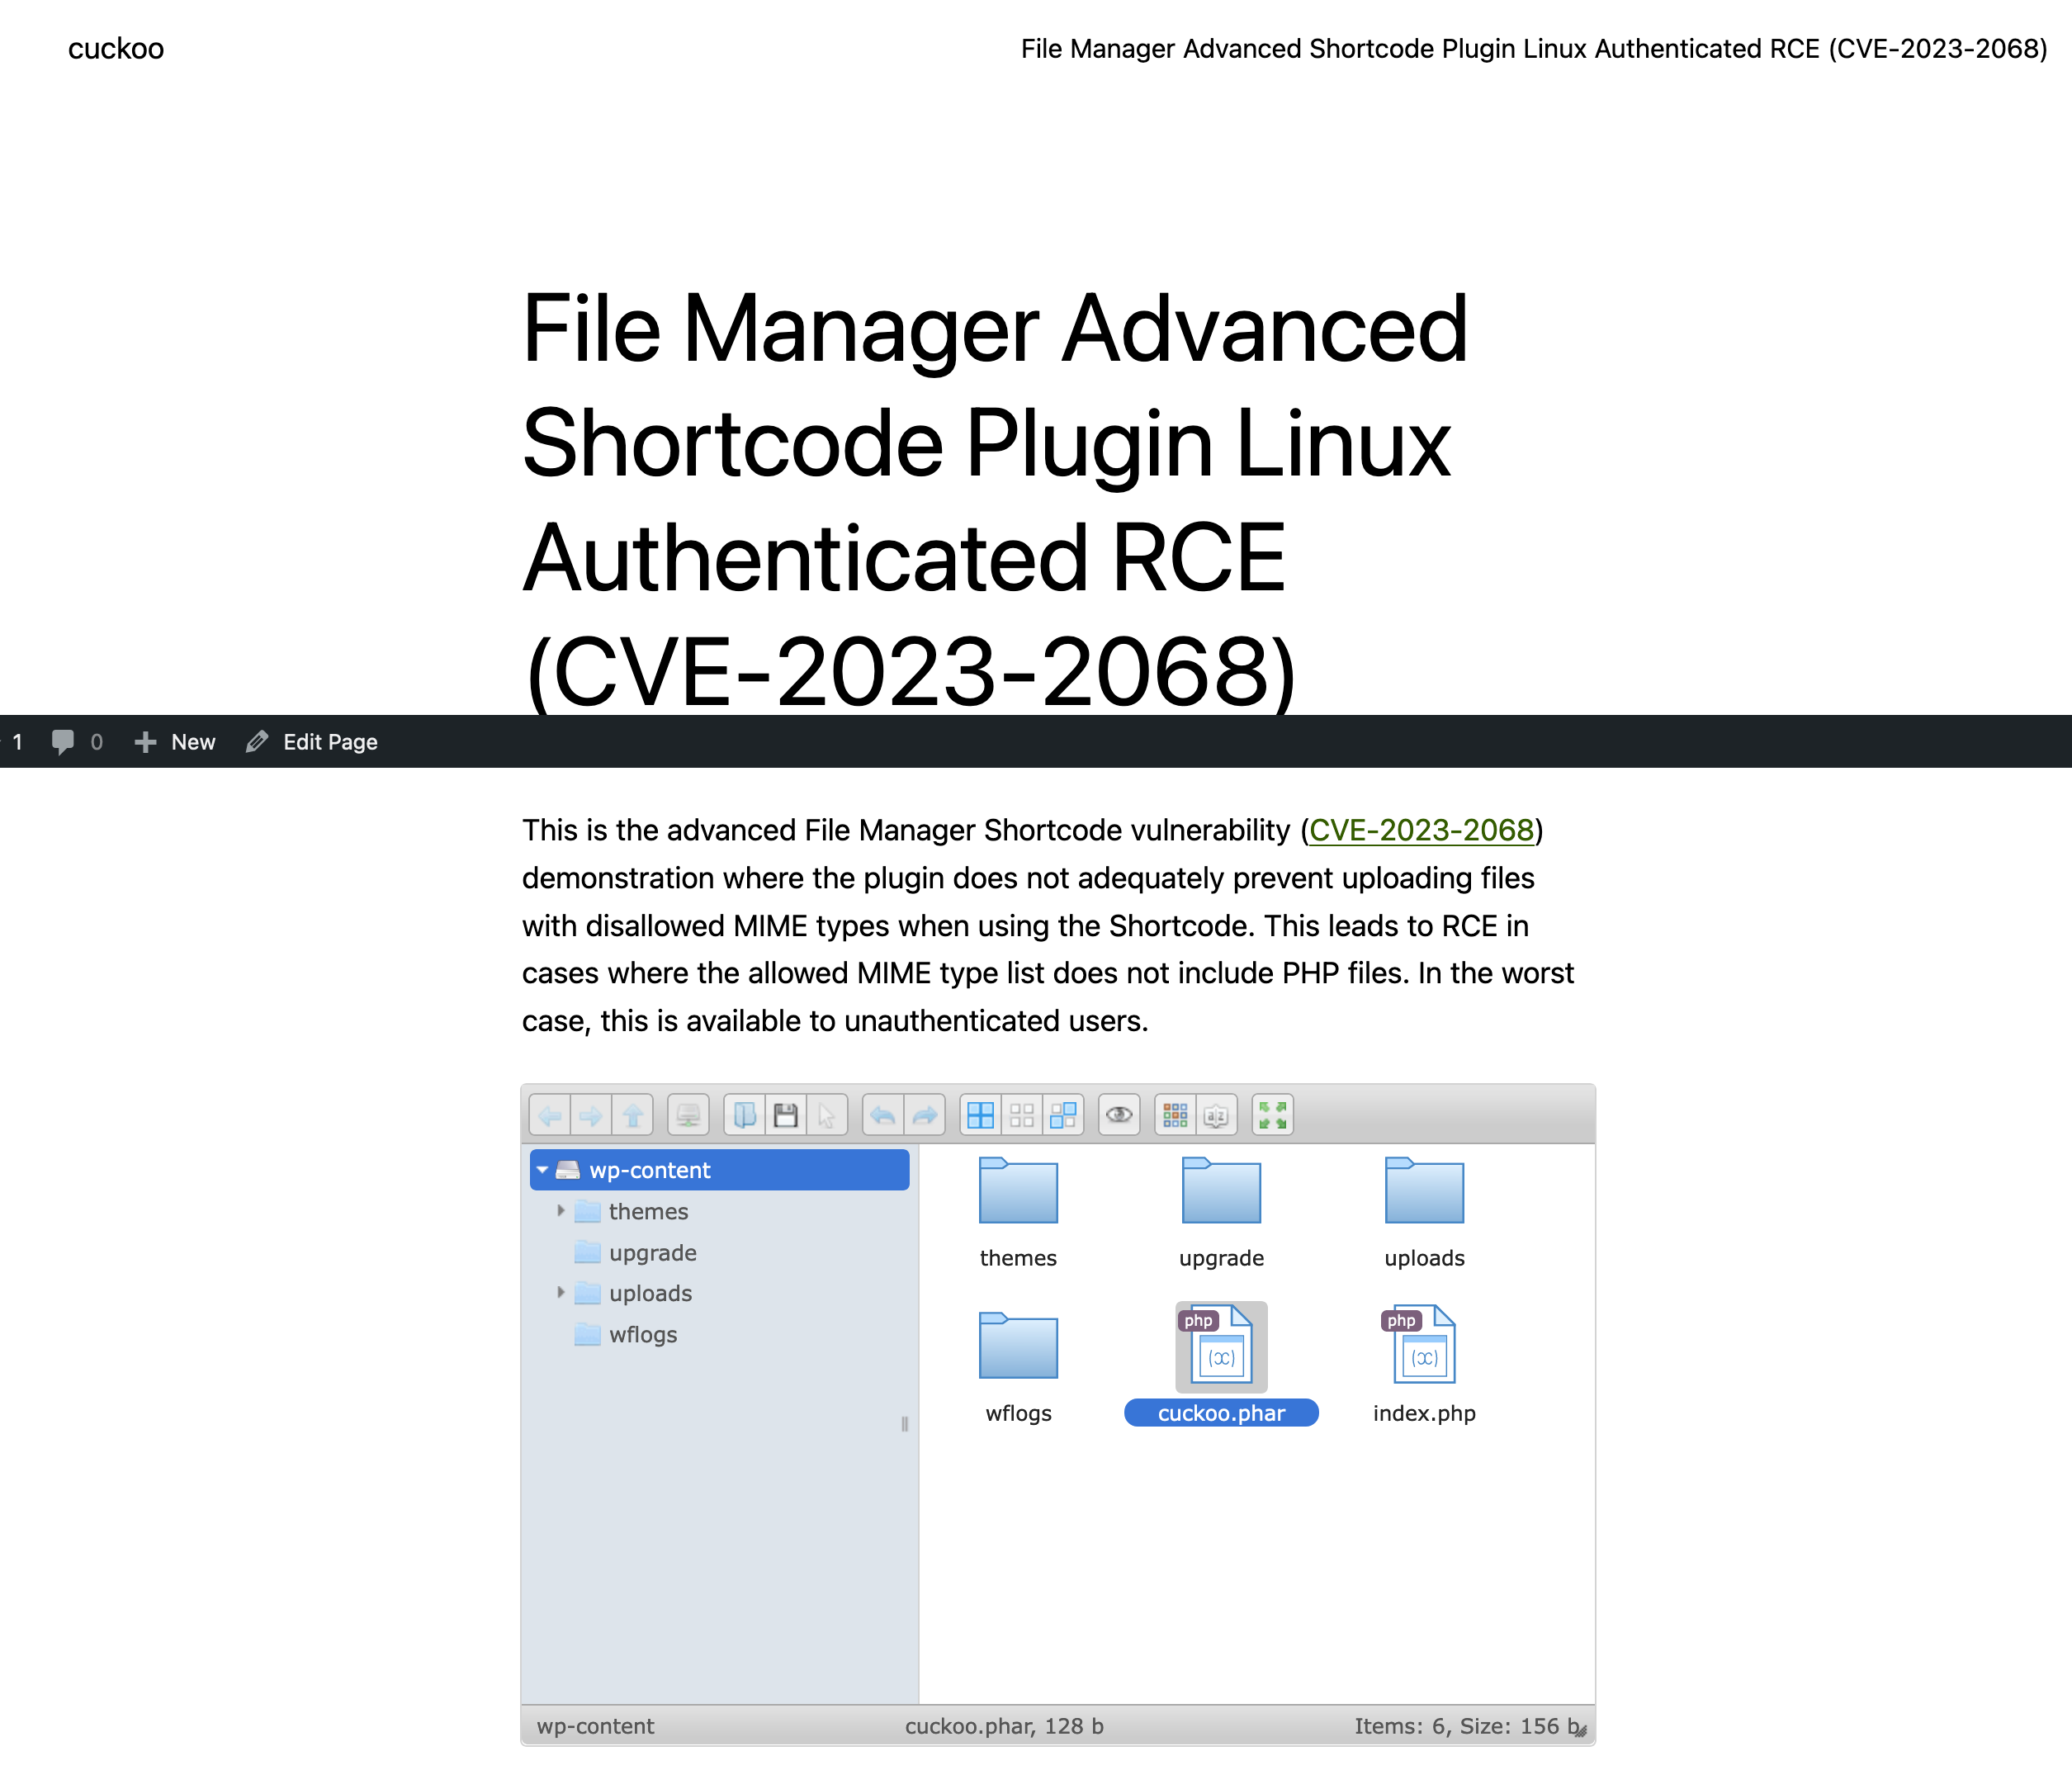 File Manager Advanced Shortcode